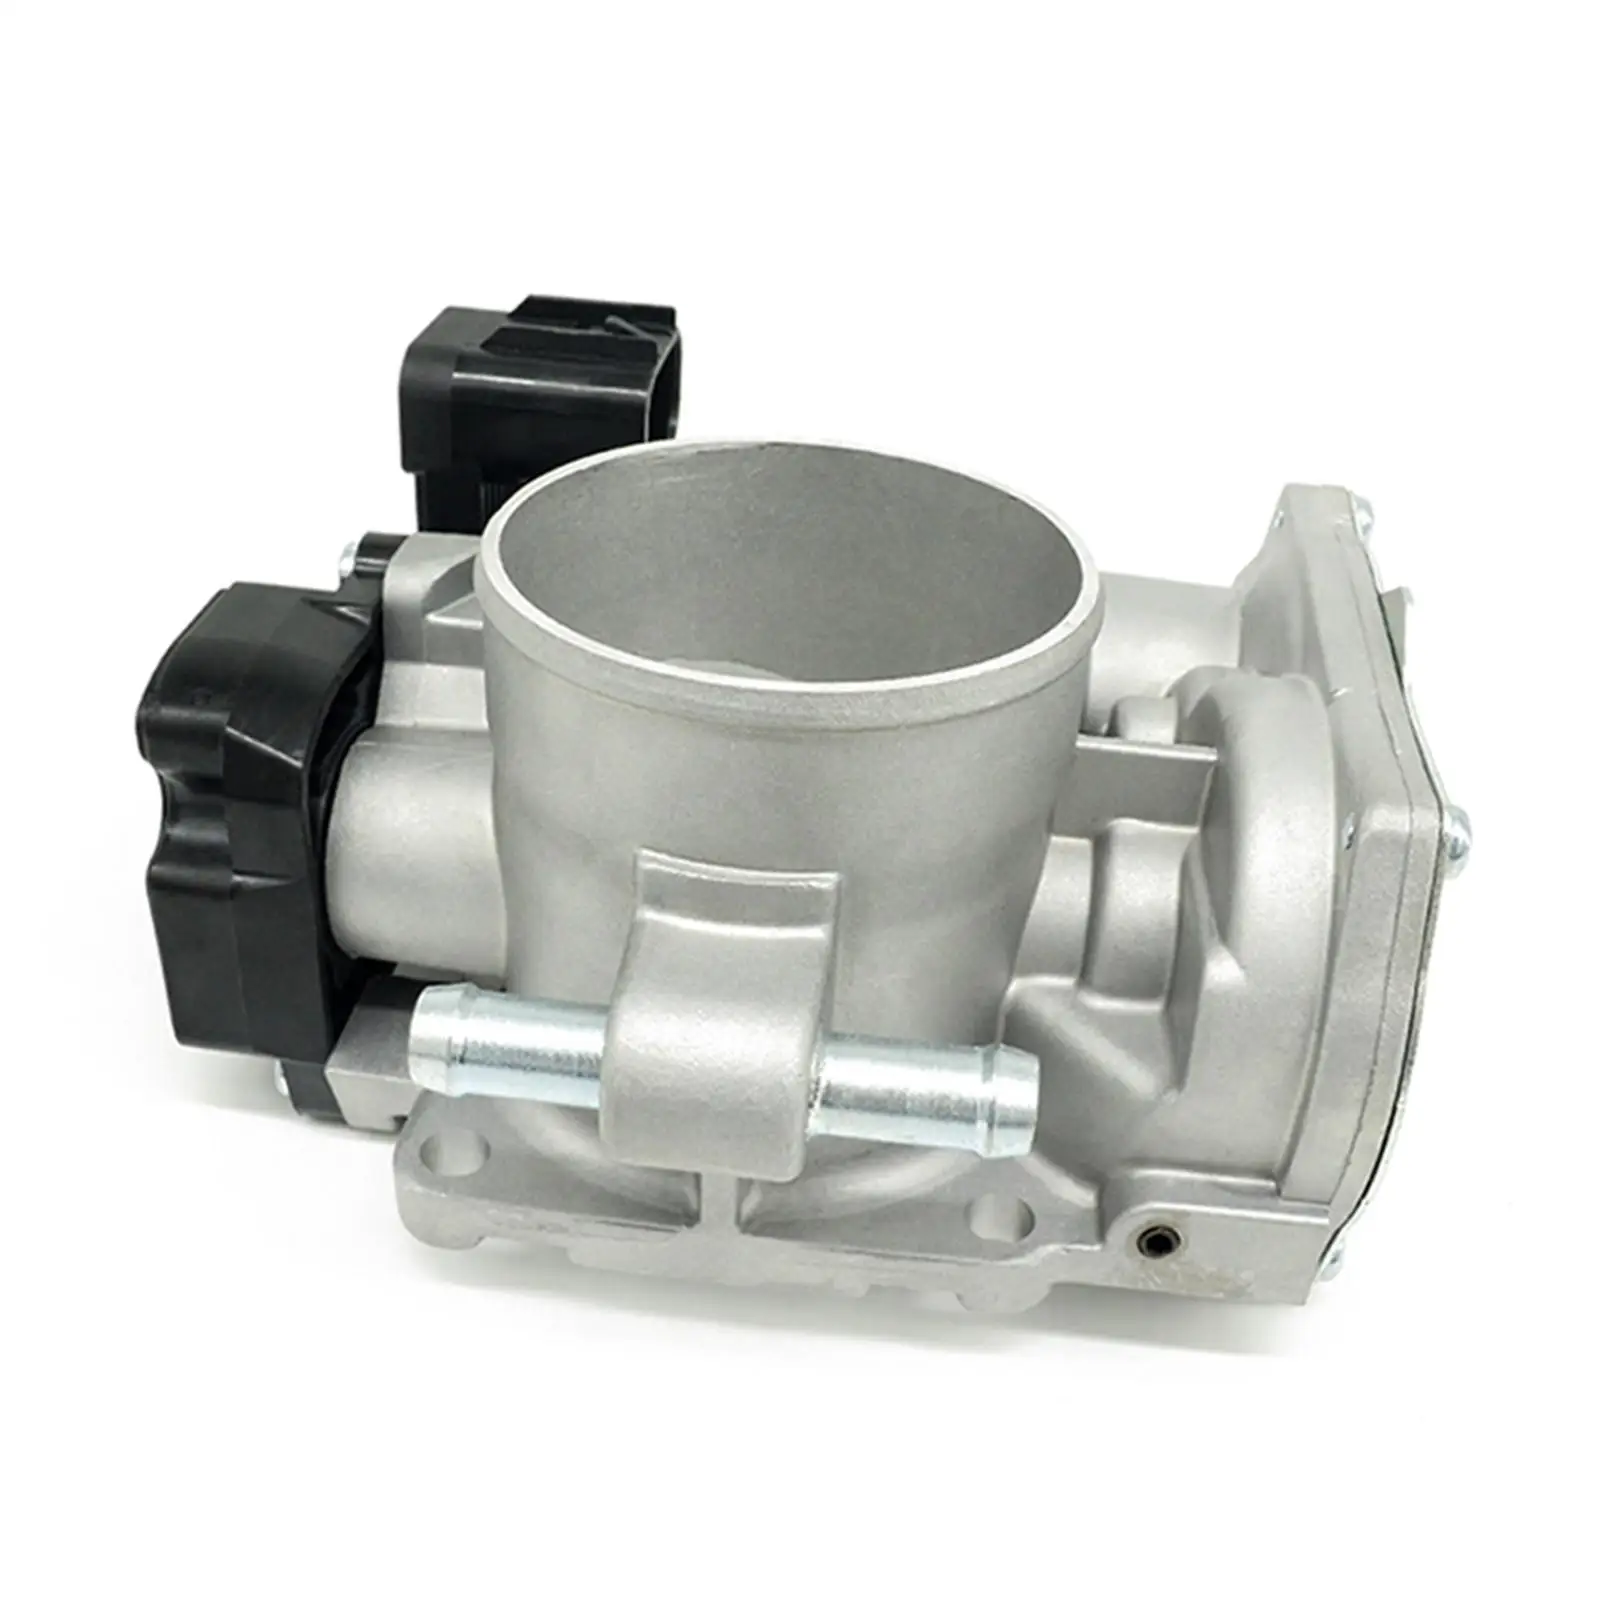 25368821 Electronic Throttle Body Fit for Suzuki  Reno I4 2.0L 06-08 Accessories High Performance